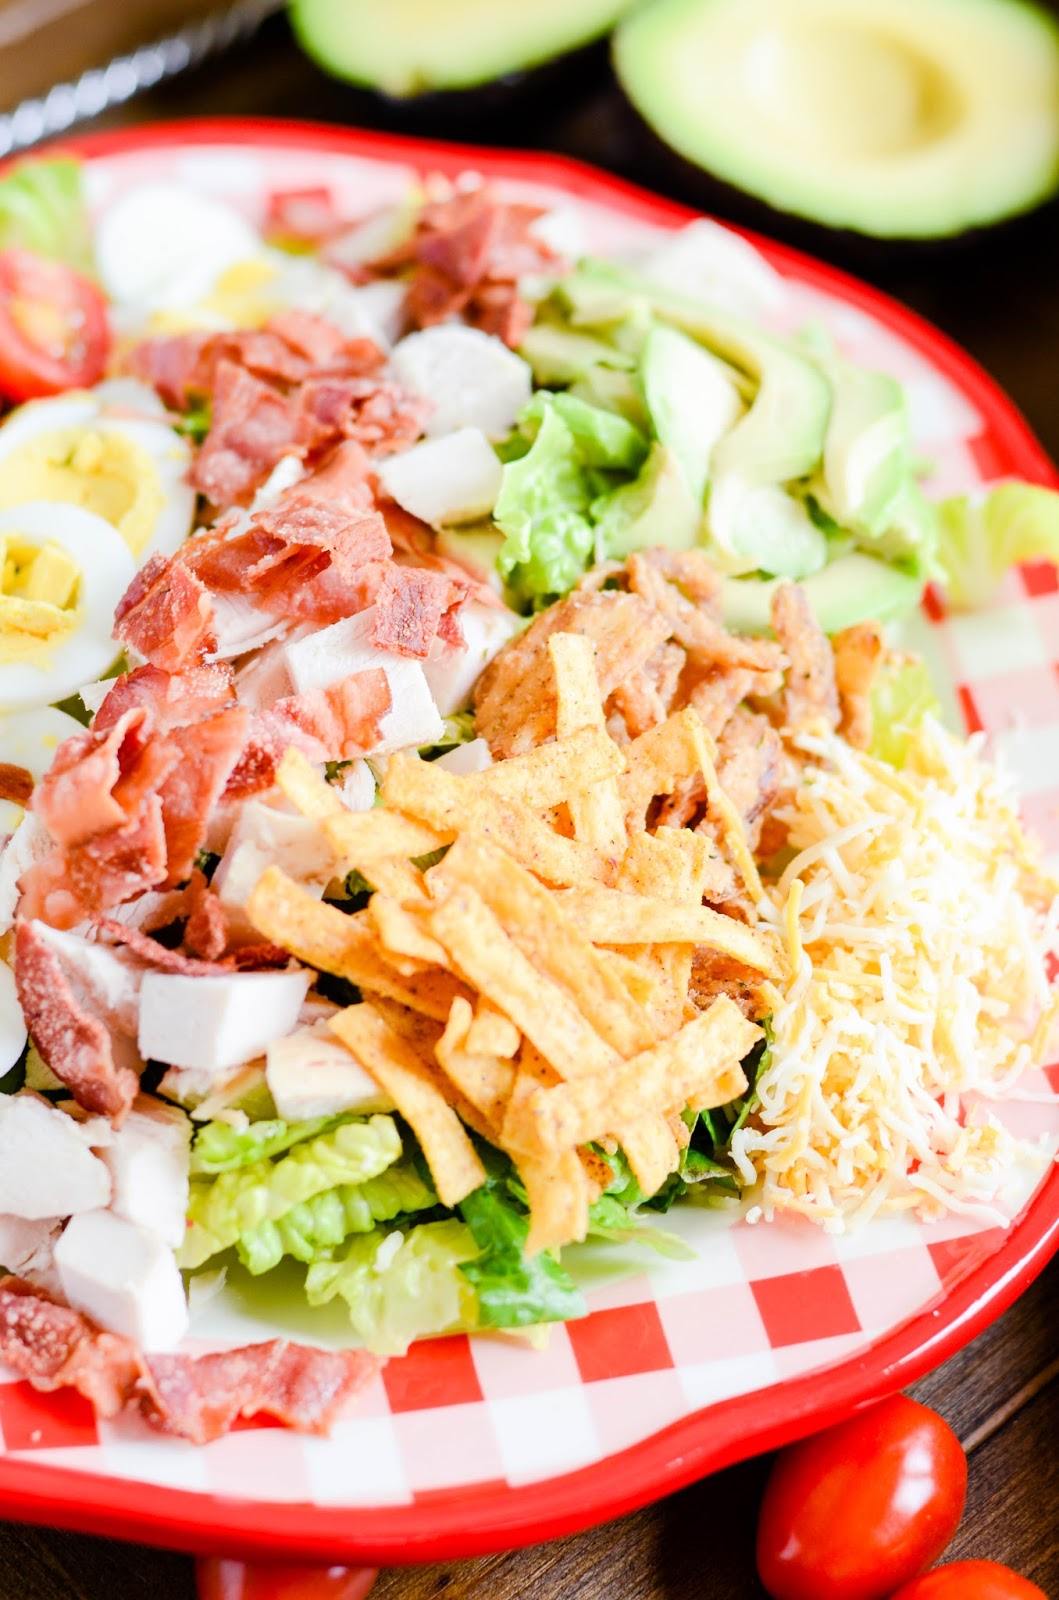 Perfect for warm weather, parties, lunch, and dinner! Crunchy, creamy, and just a little bit spicy BBQ Chicken Cobb Salad.